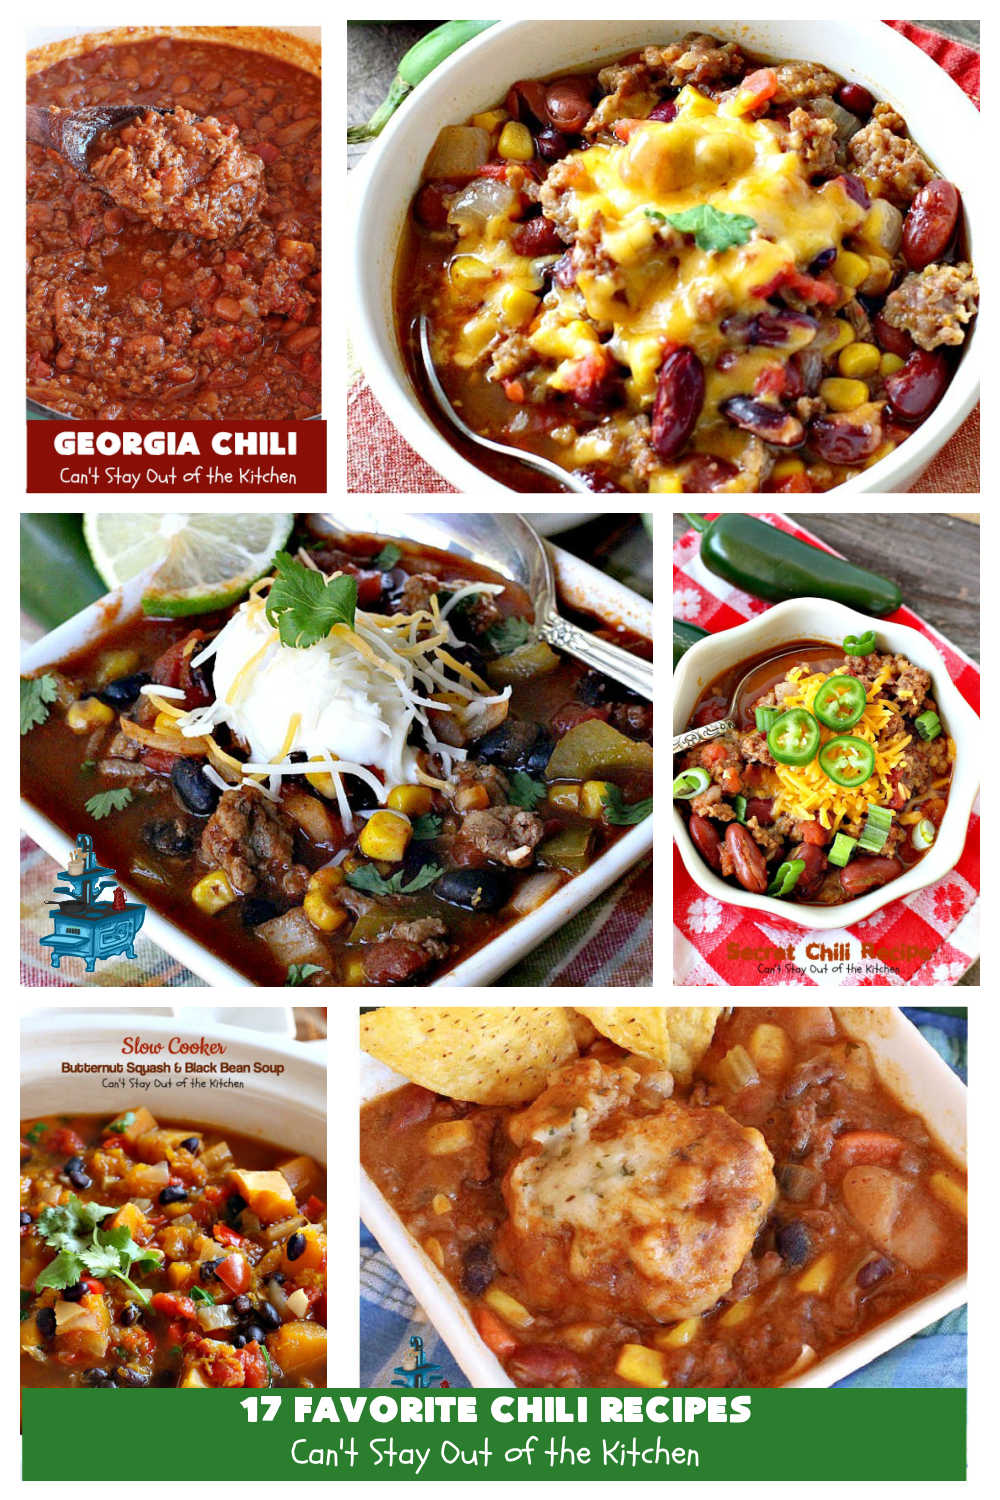 17 Favorite Chili Recipes | Can't Stay Out of the Kitchen | 17 delightful #chili #recipes to choose from including #beef, #chicken, #turkey or #vegan. Most are #GlutenFree. Enjoy your favorite #Fall comfort food with one of these great entrees. #ChiliRecipes #17FavoriteChiliRecipes